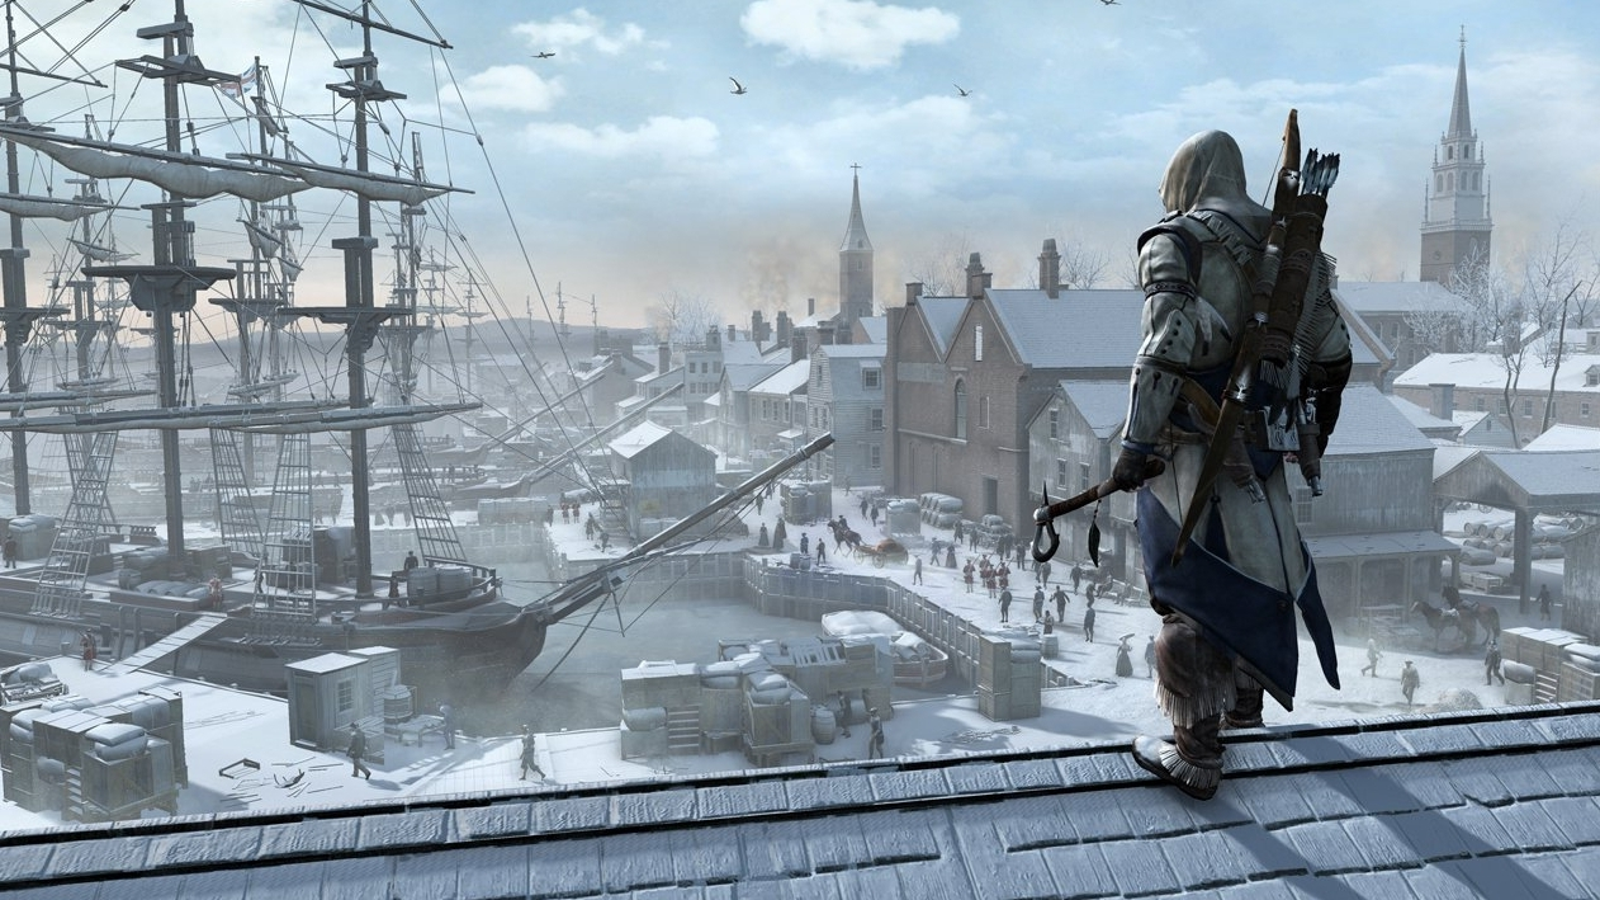 Assassin's Creed 3 Remastered on Switch lacks most of the remastering work